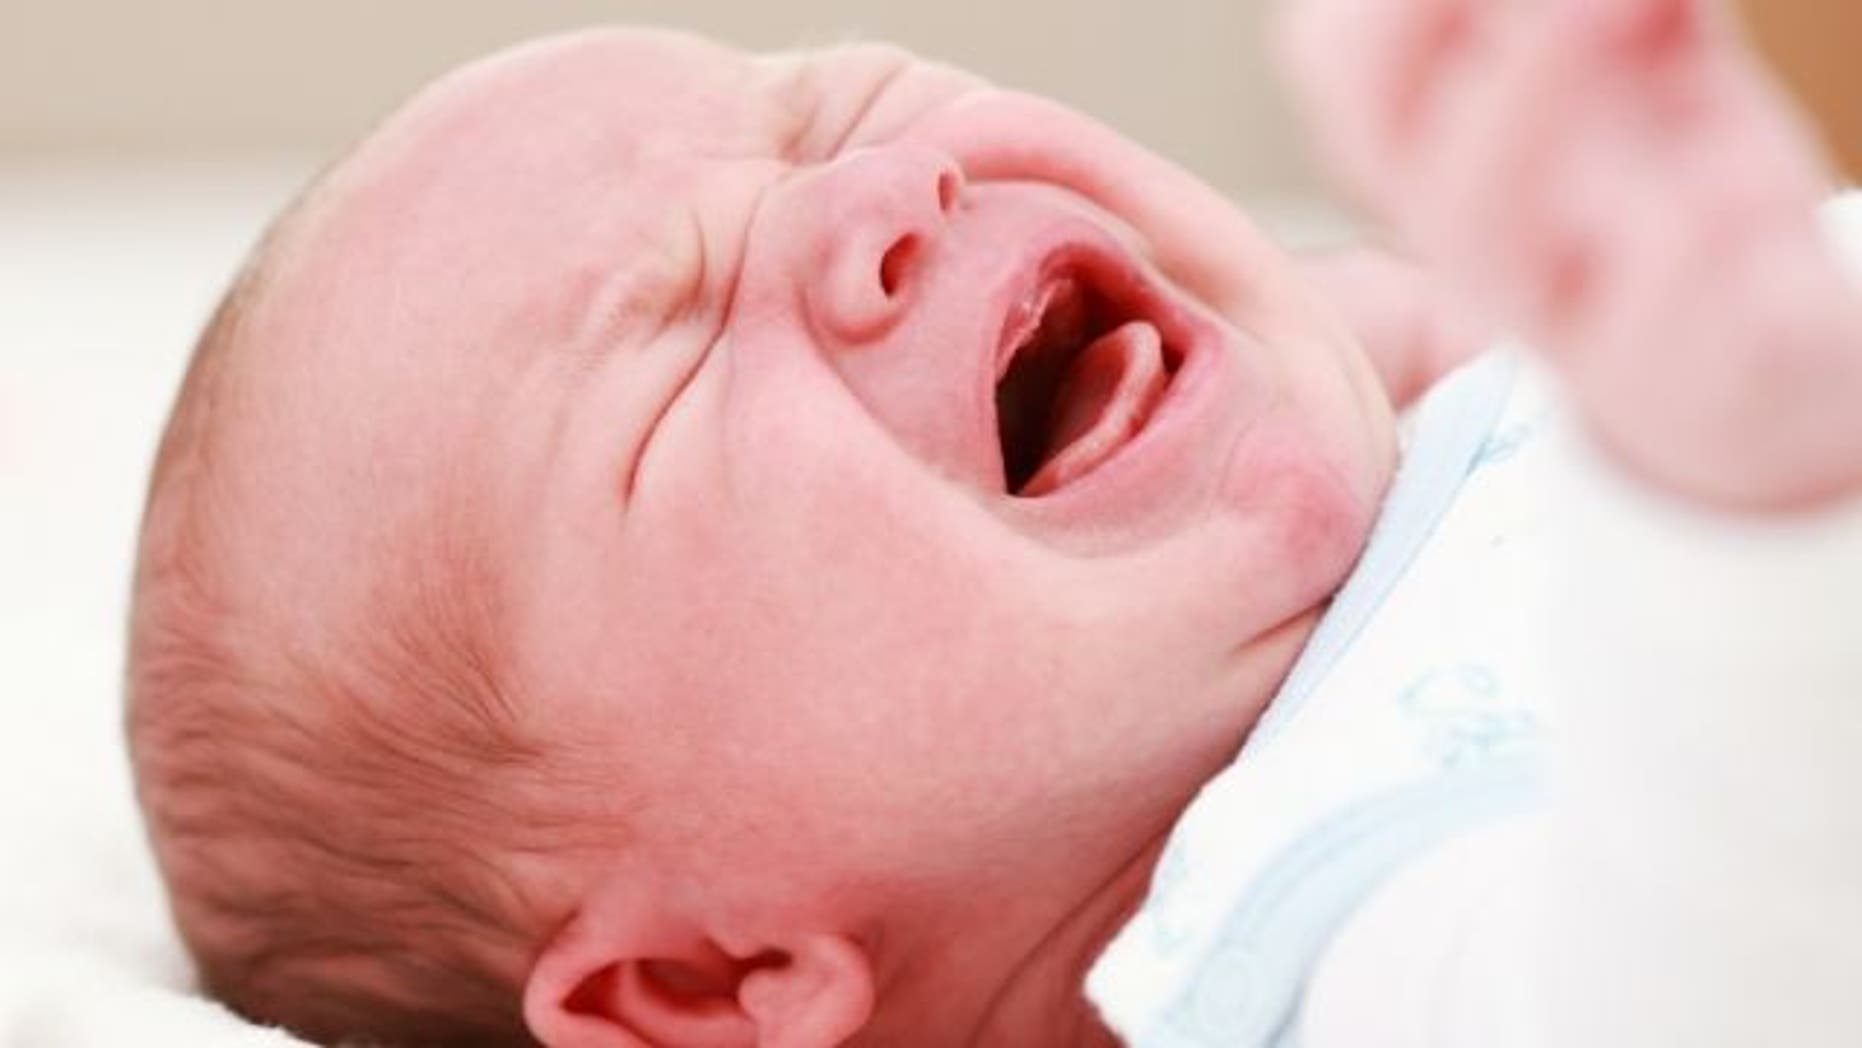 letting babies cry themselves to sleep